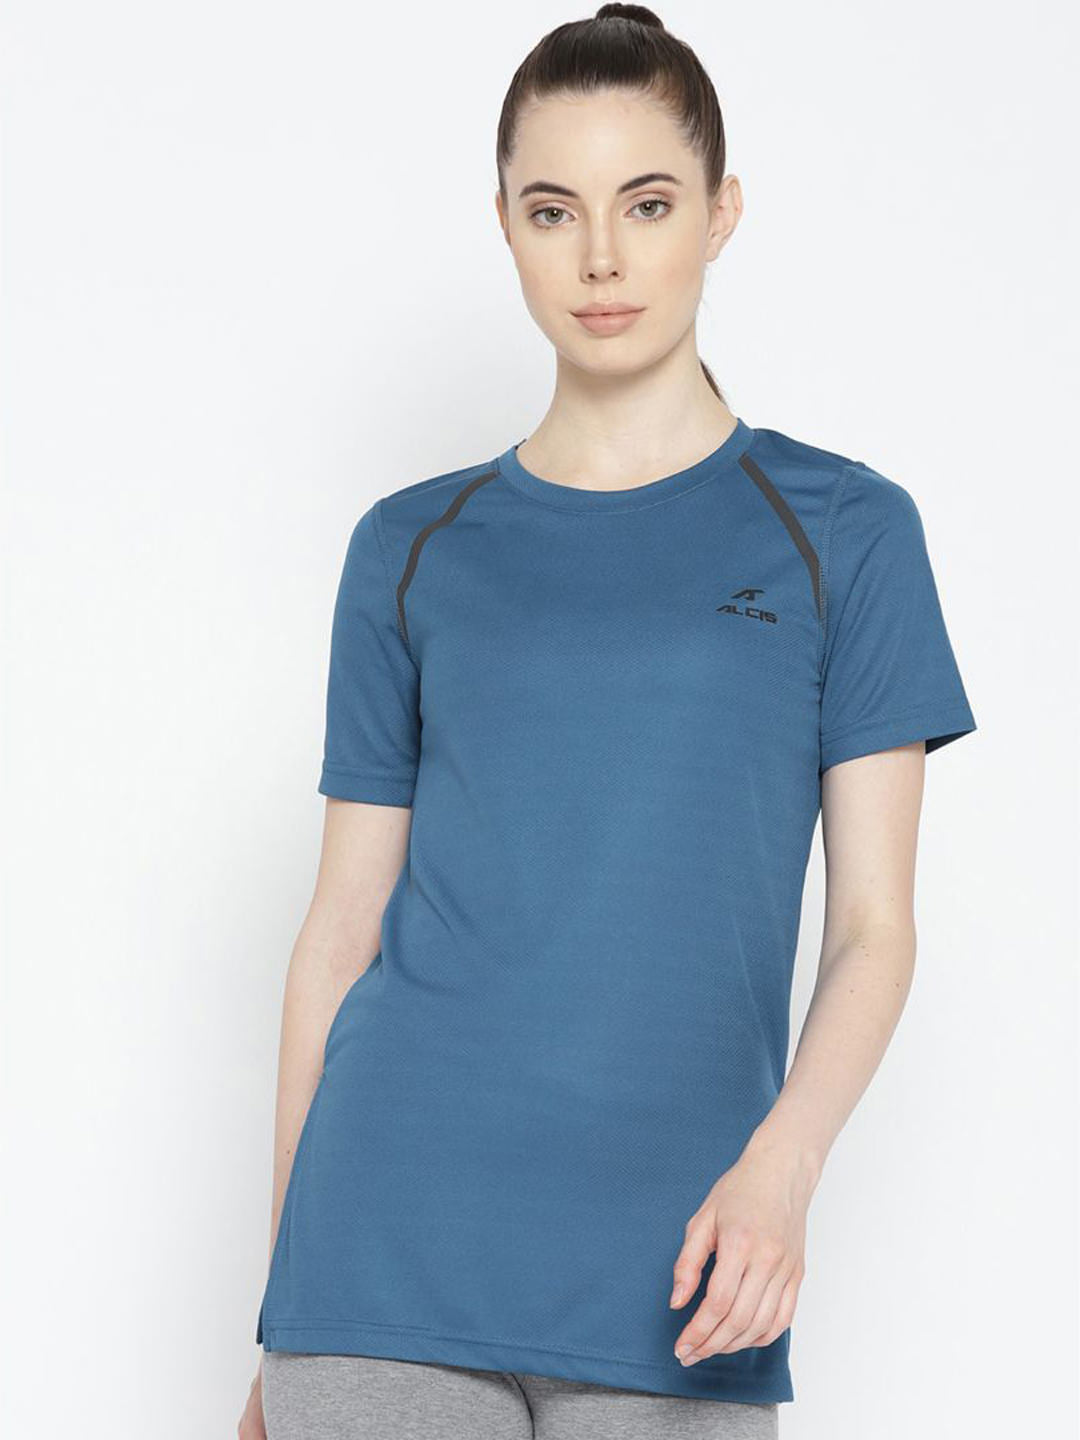 Alcis Women Teal Blue Solid Round Neck T-shirt